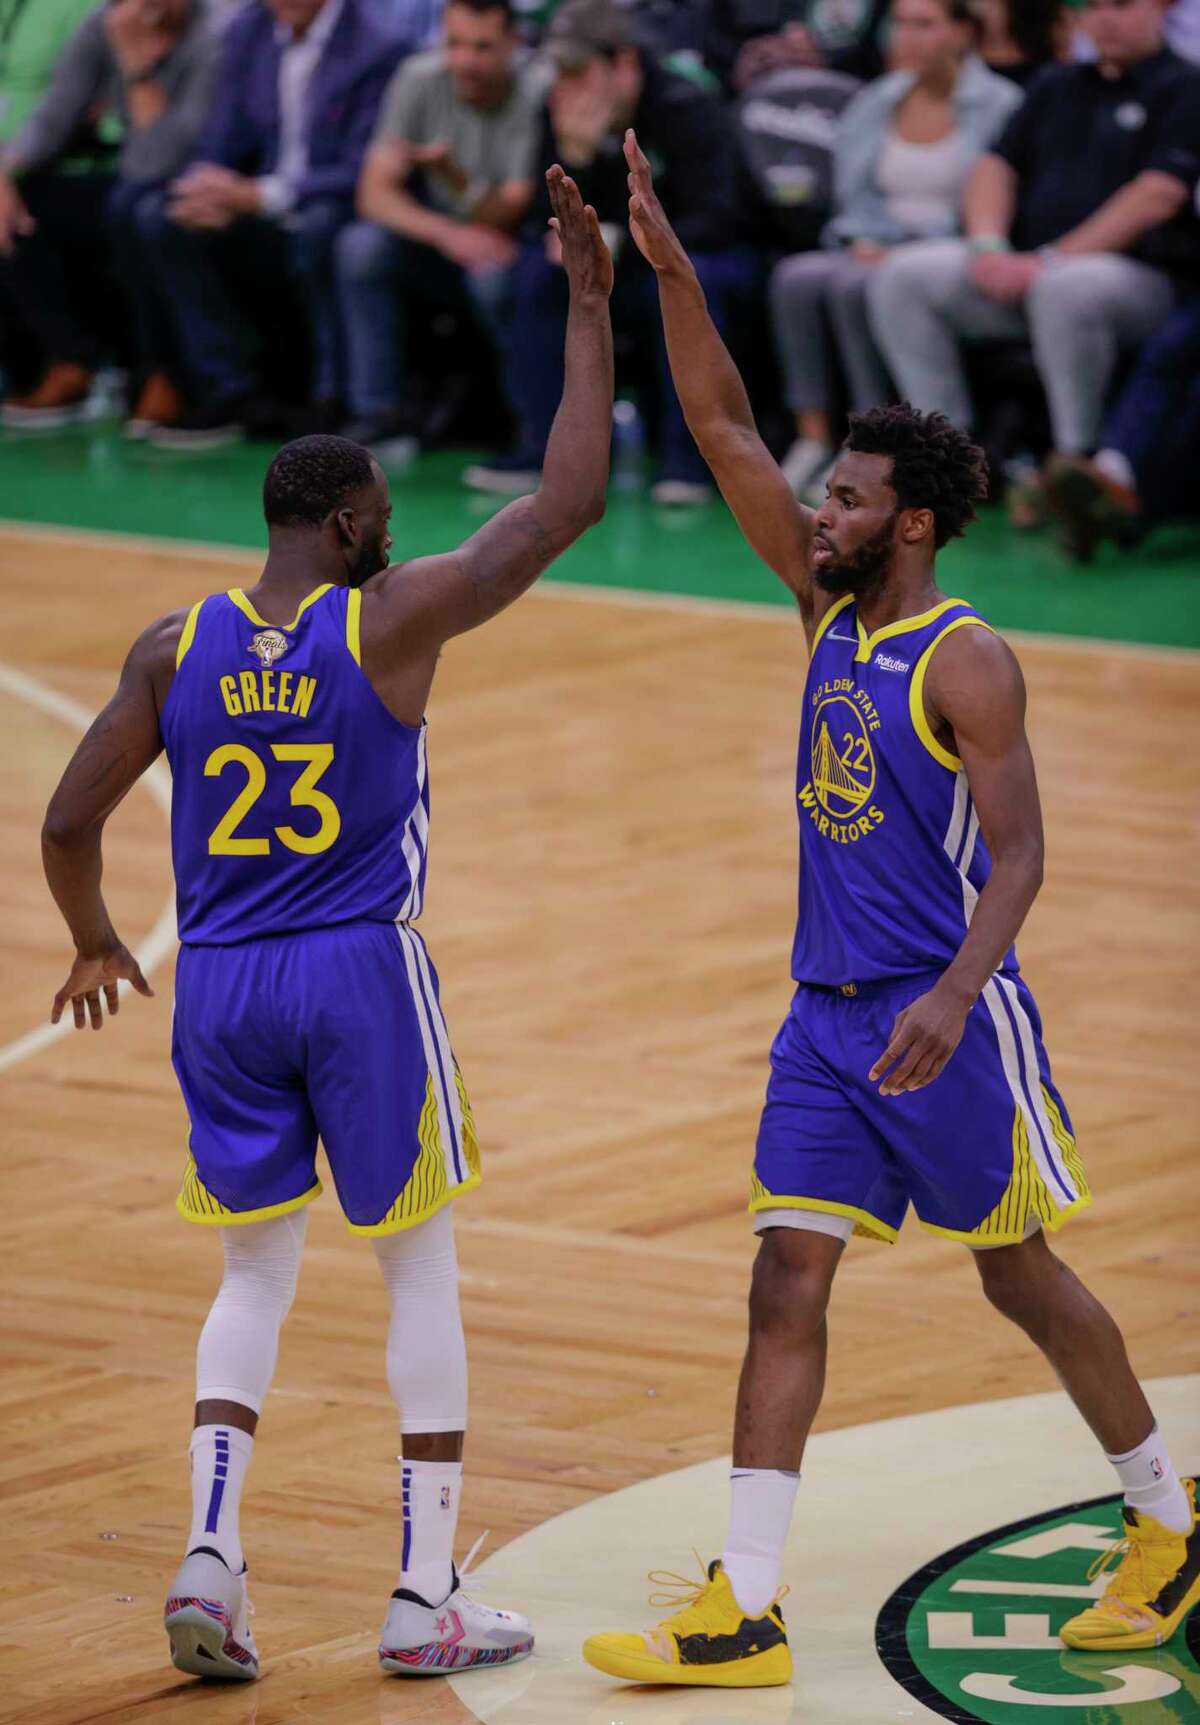 Golden State Warriors' Draymond Green, 23, gives Andrew Wiggins, 22, a high five during the second quarter in Game 6 of the NBA Finals at TD Garden in Boston, Mass., on Thursday, June 16, 2022.